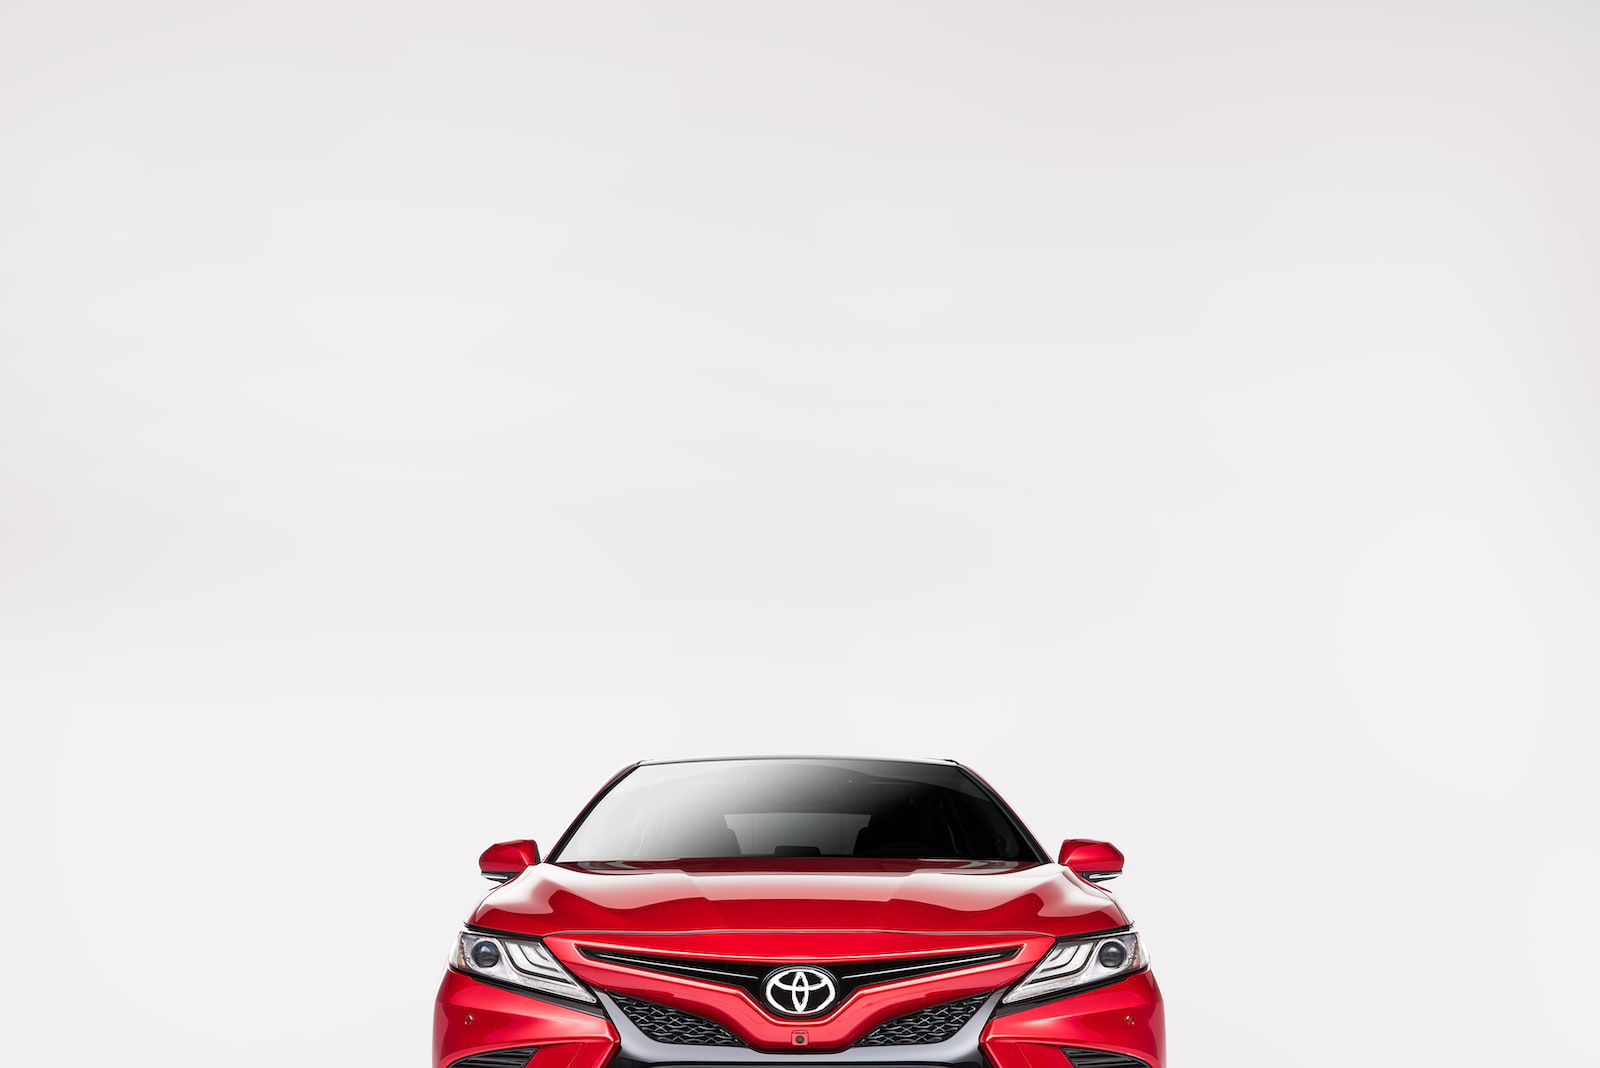 Red Toyota vehicle on light background